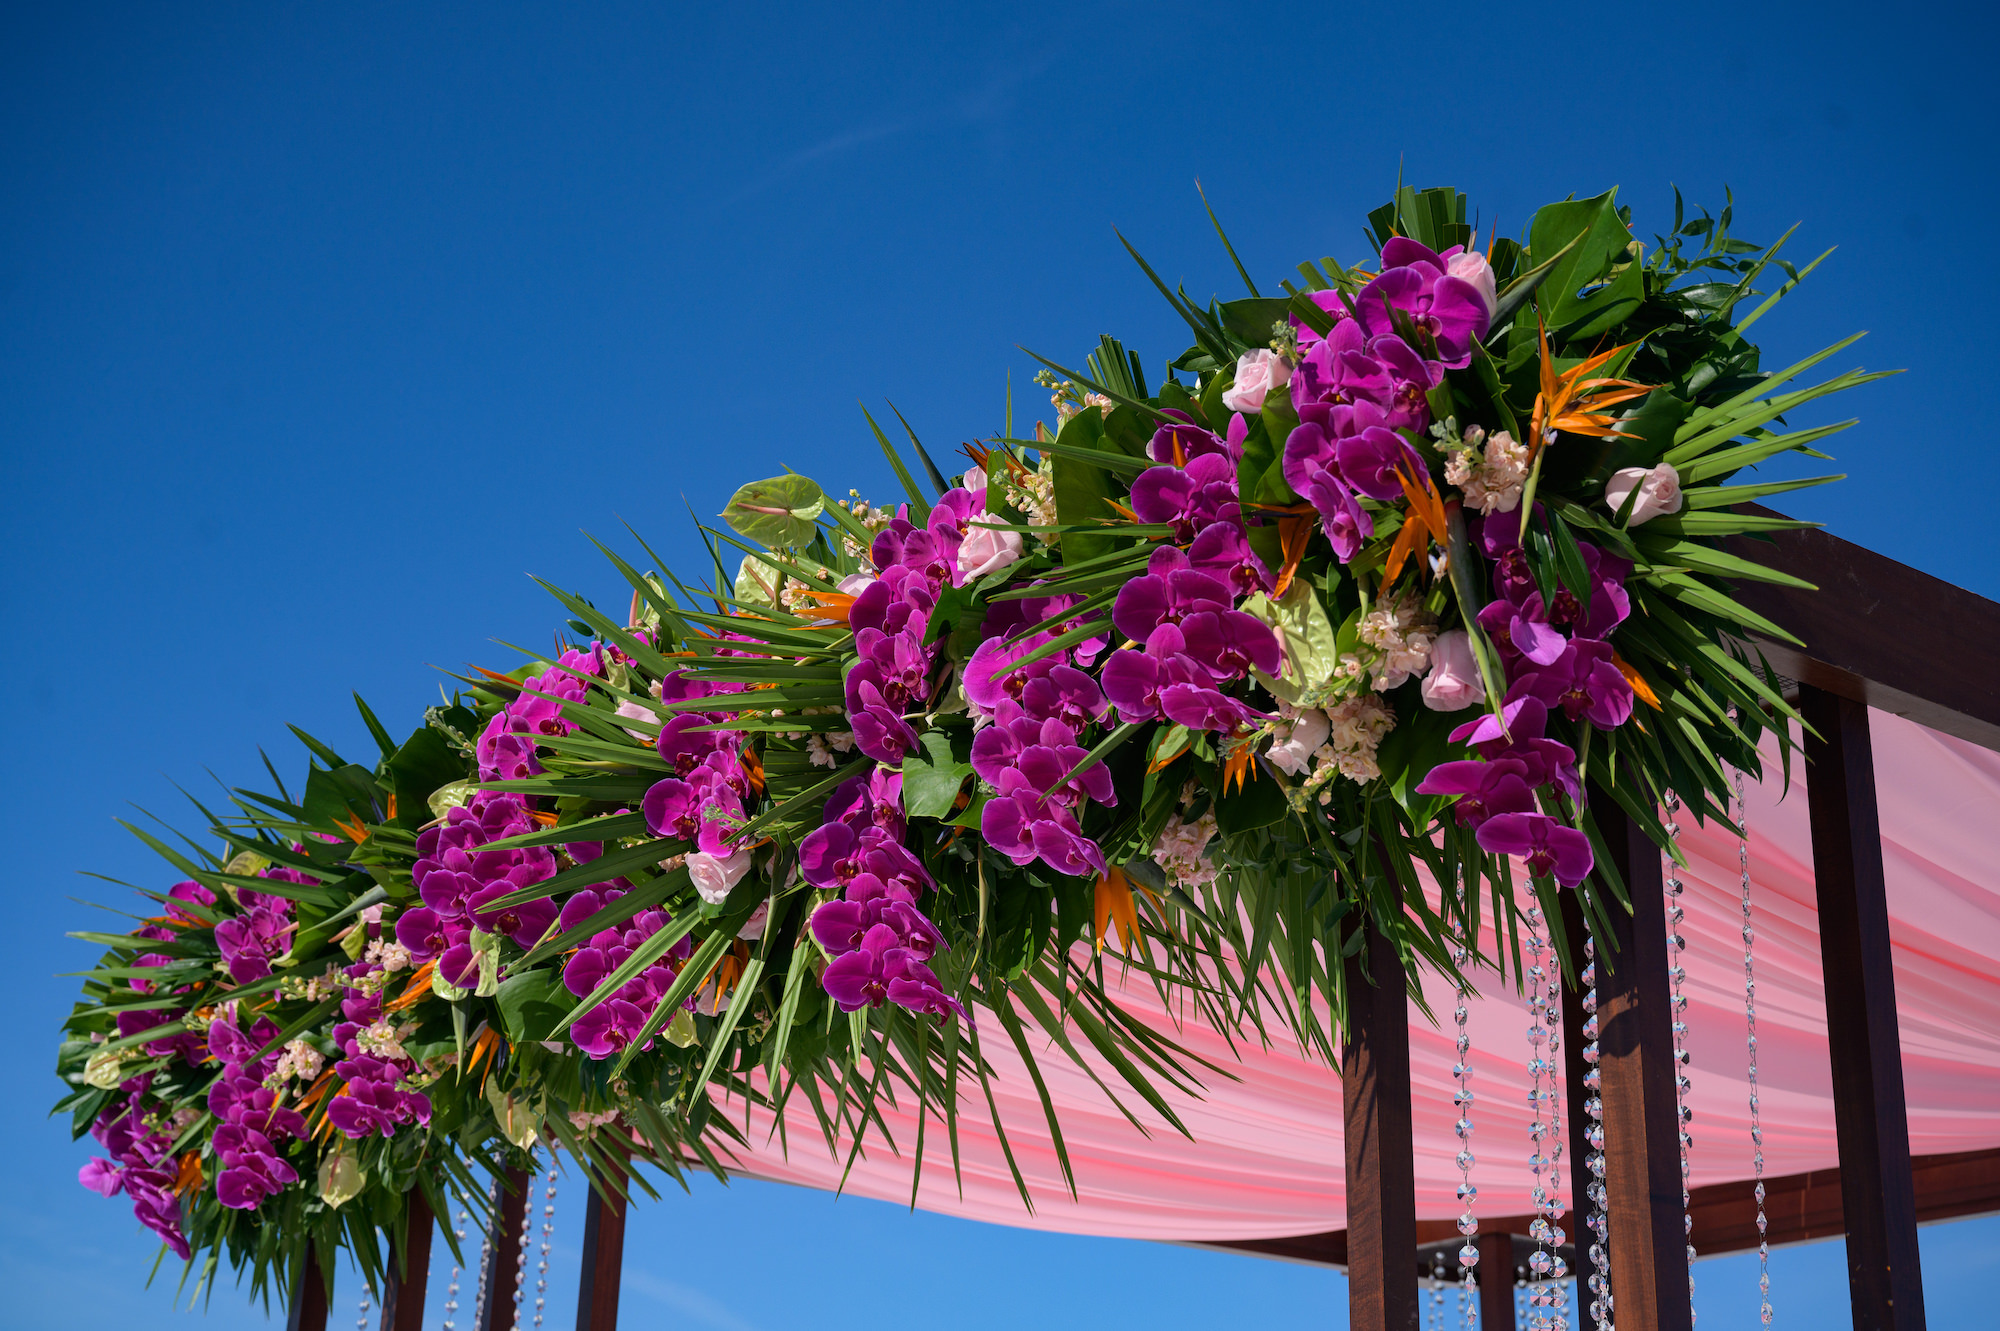 Tropical Wedding Ceremony Decor, Altar Decorated with Orchids, Palm Leaves and Colorful Flowers, Bright Purple, Fuchsia, Green, and Orange Flowers, Coral Draping